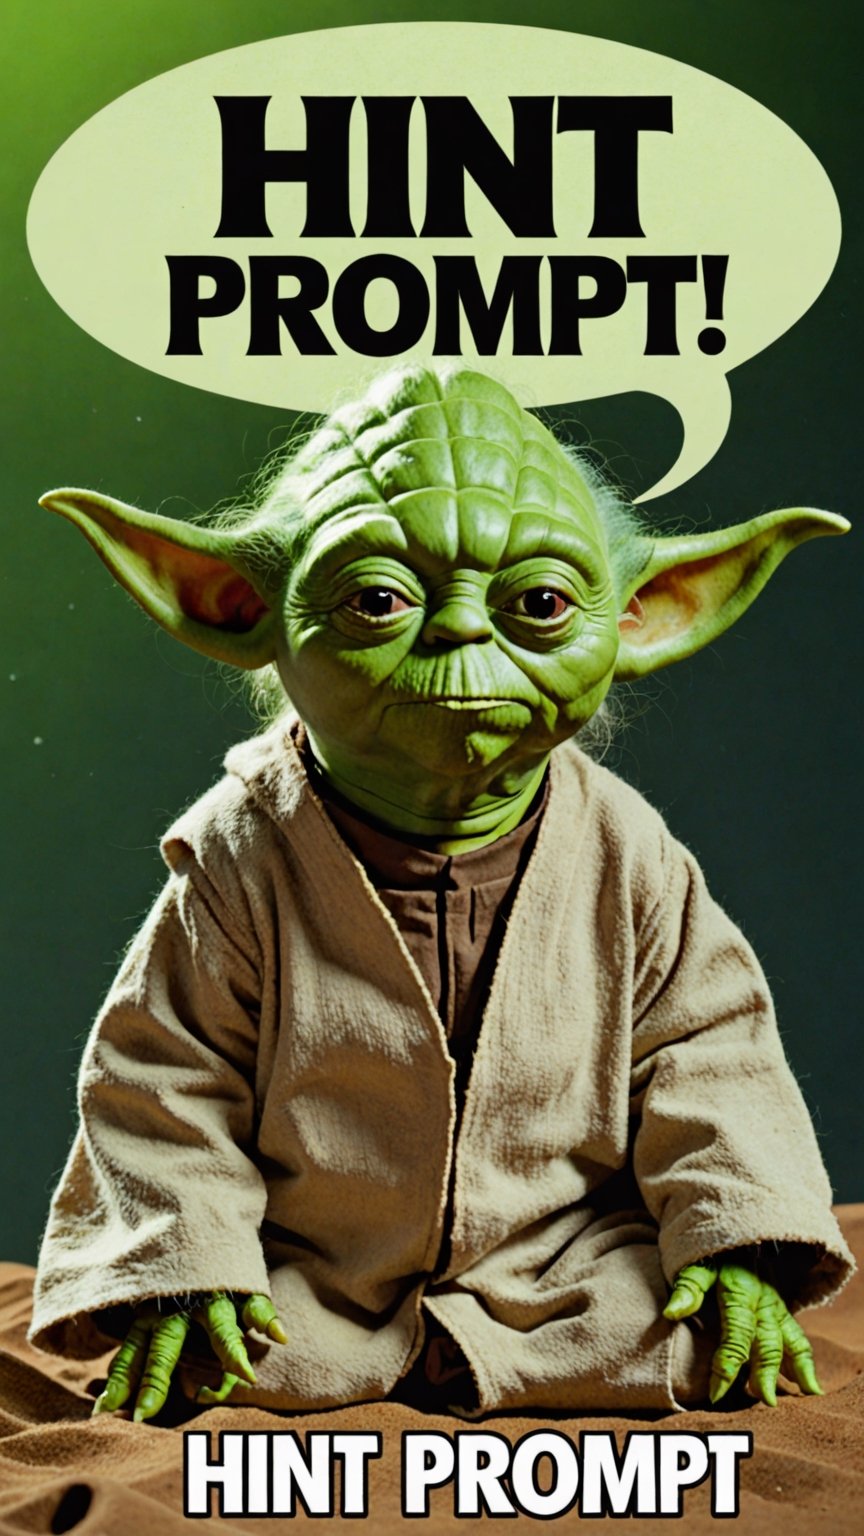 Photo of Yoda with text bubble that says "hint prompt"